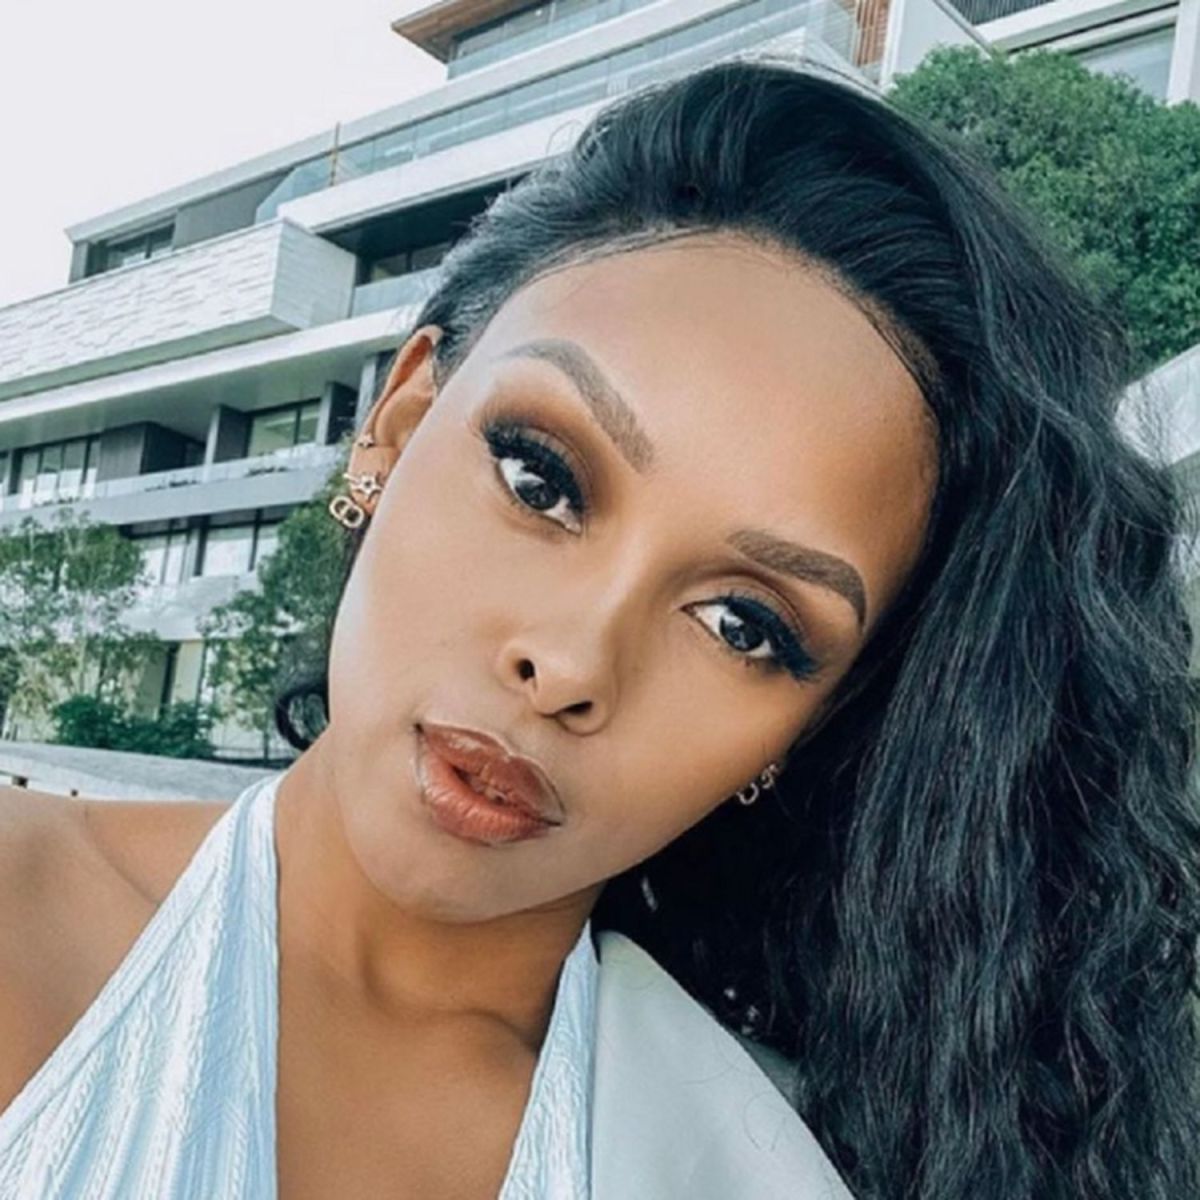 Fashion Influencer Kefilwe Mabote Ready To &Quot;Sink The Ship&Quot; Amidst Marriage Controversy 1